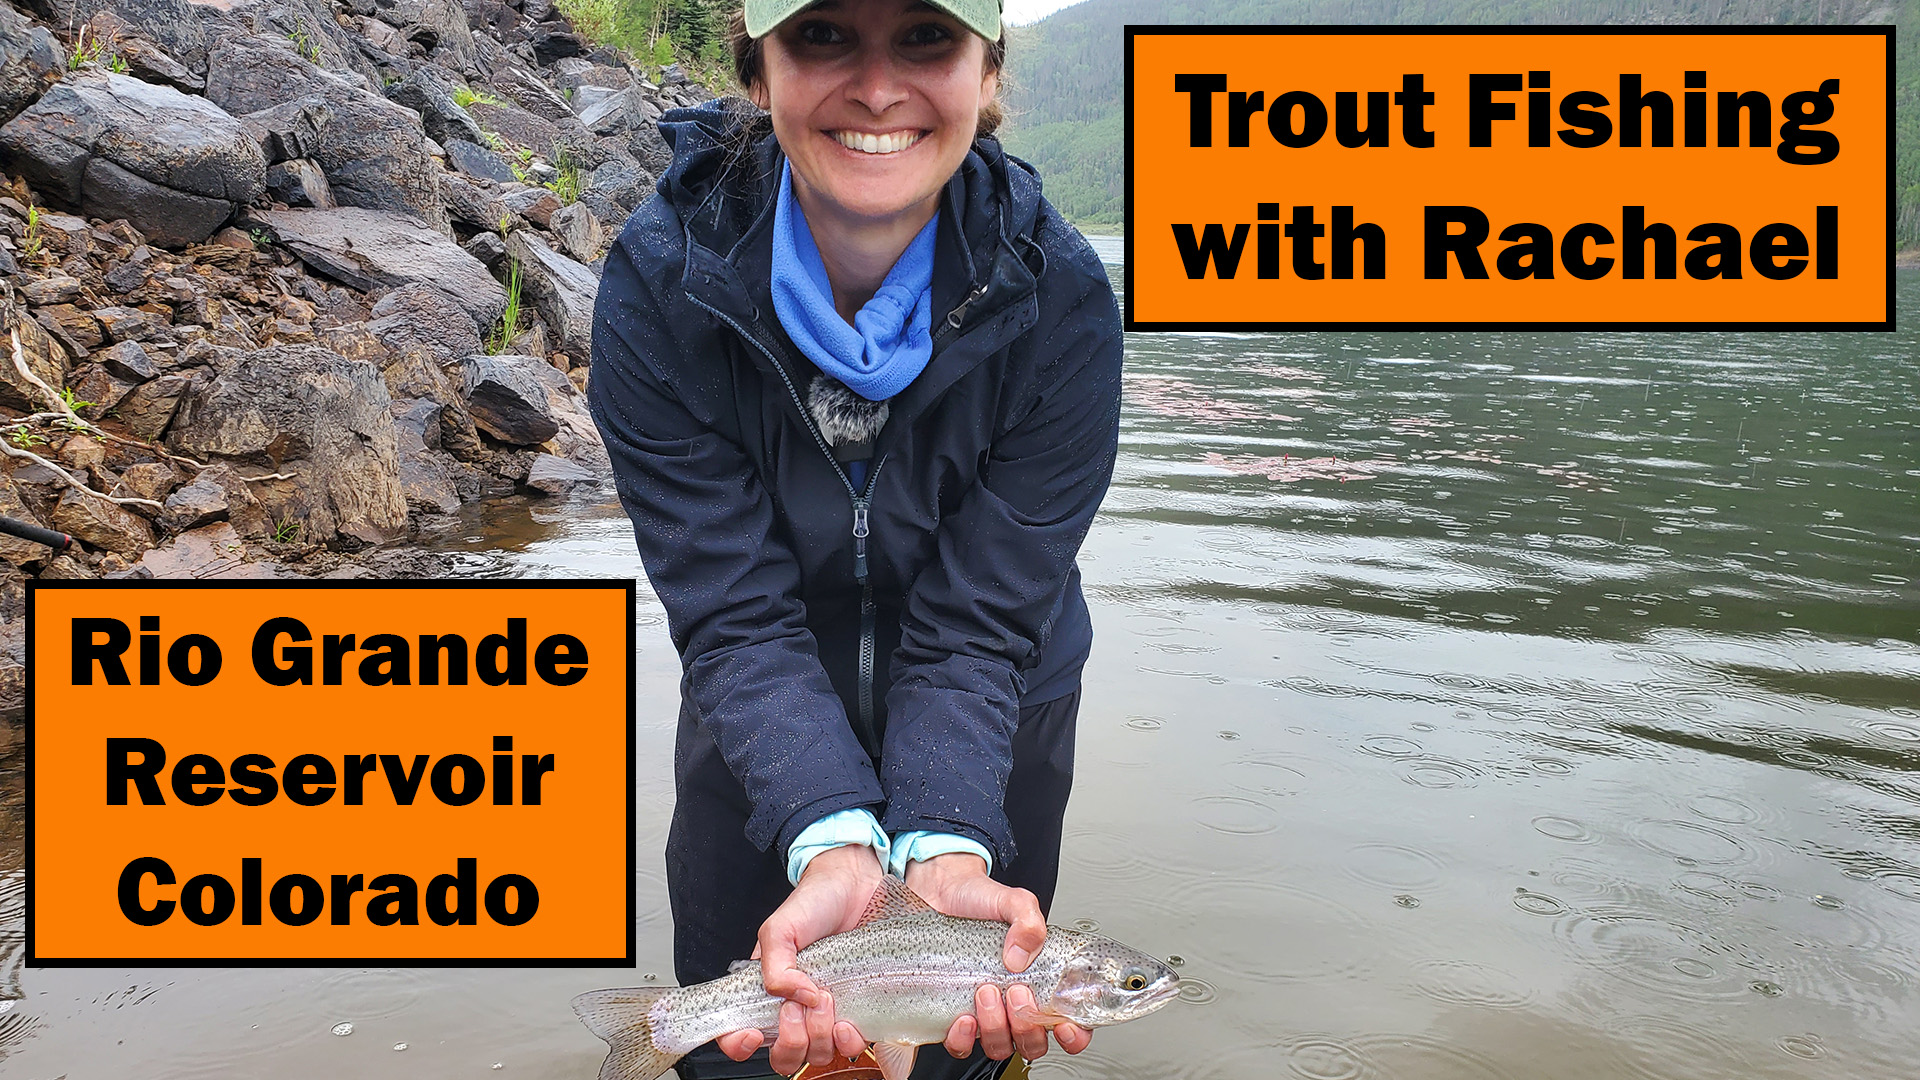 Trout Fishing the Rio Grande Reservoir